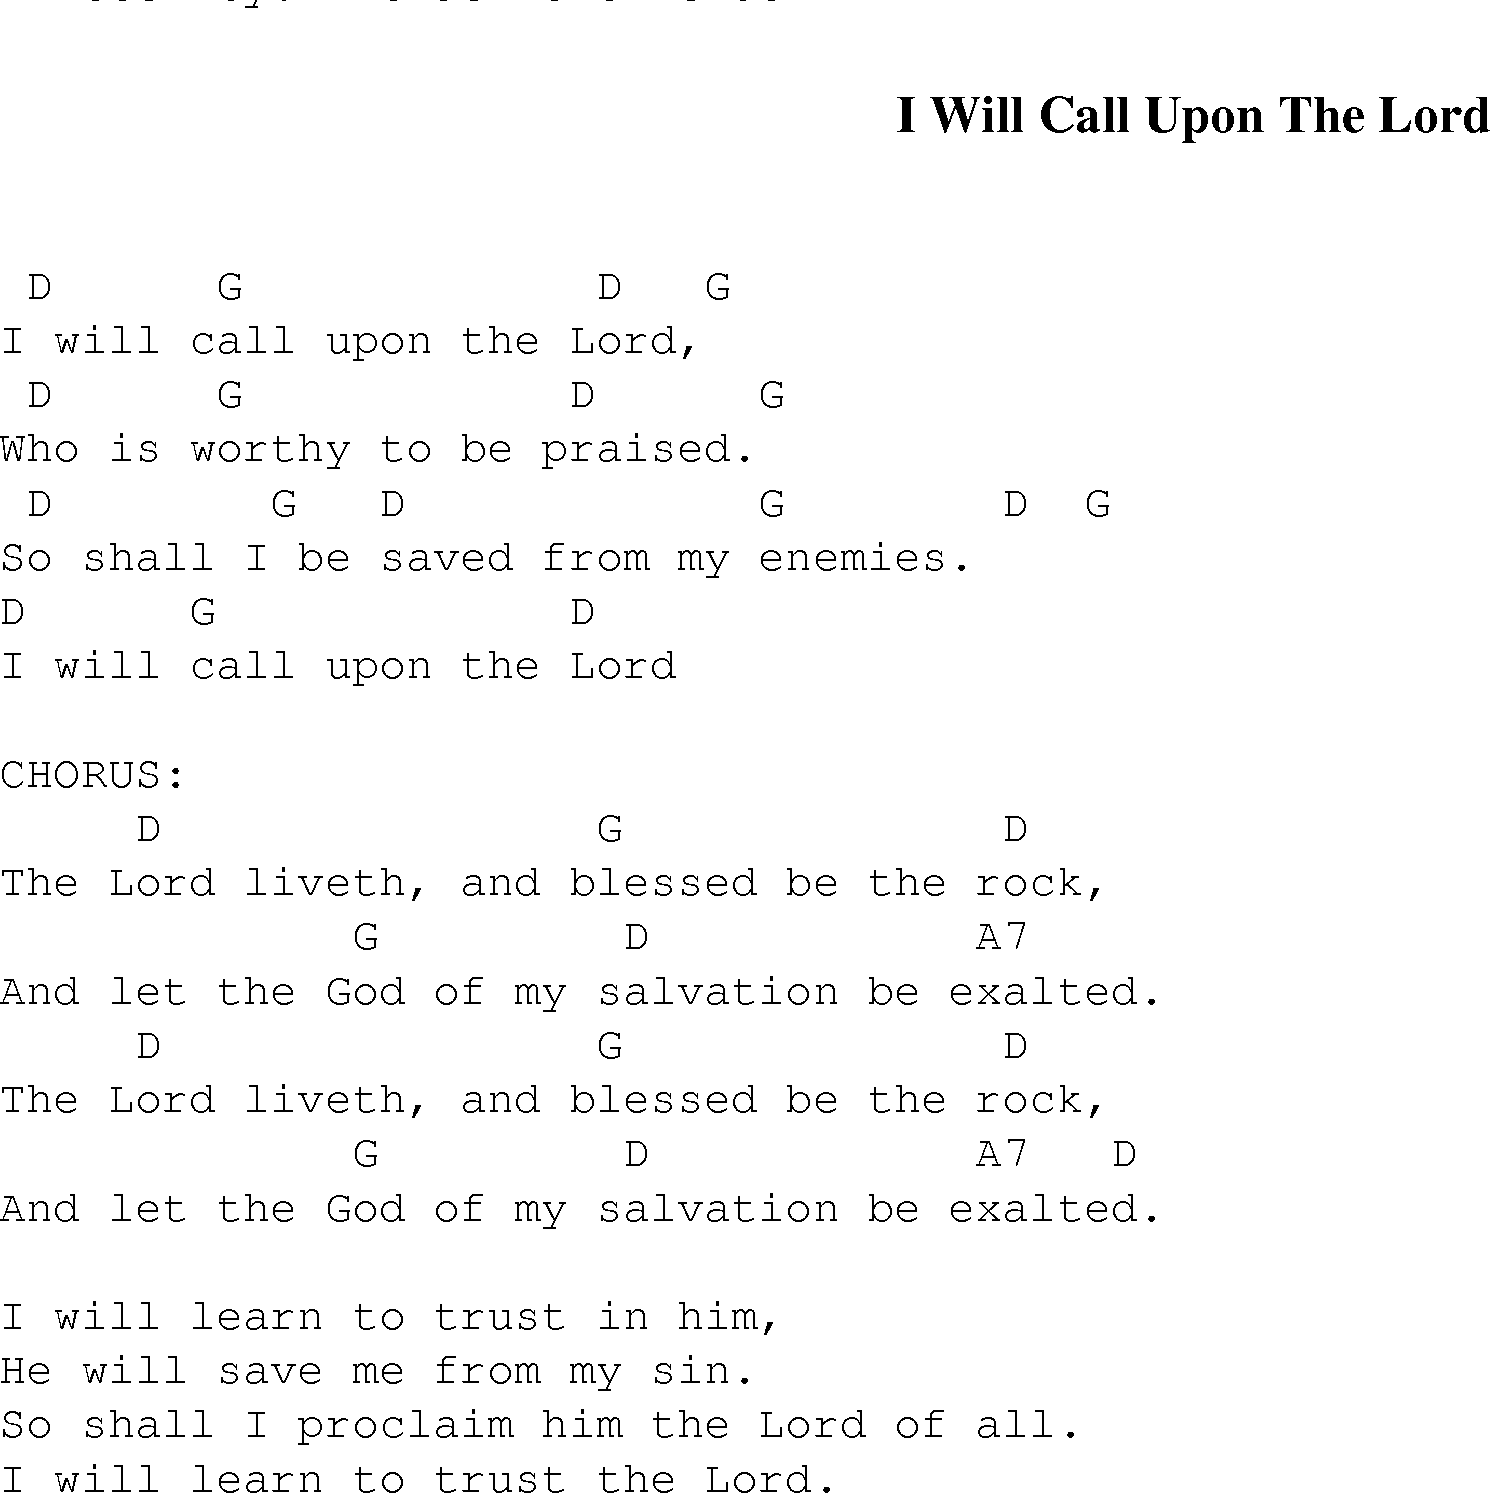 Gospel Song: i_will_call_upon_the_lord, lyrics and chords.